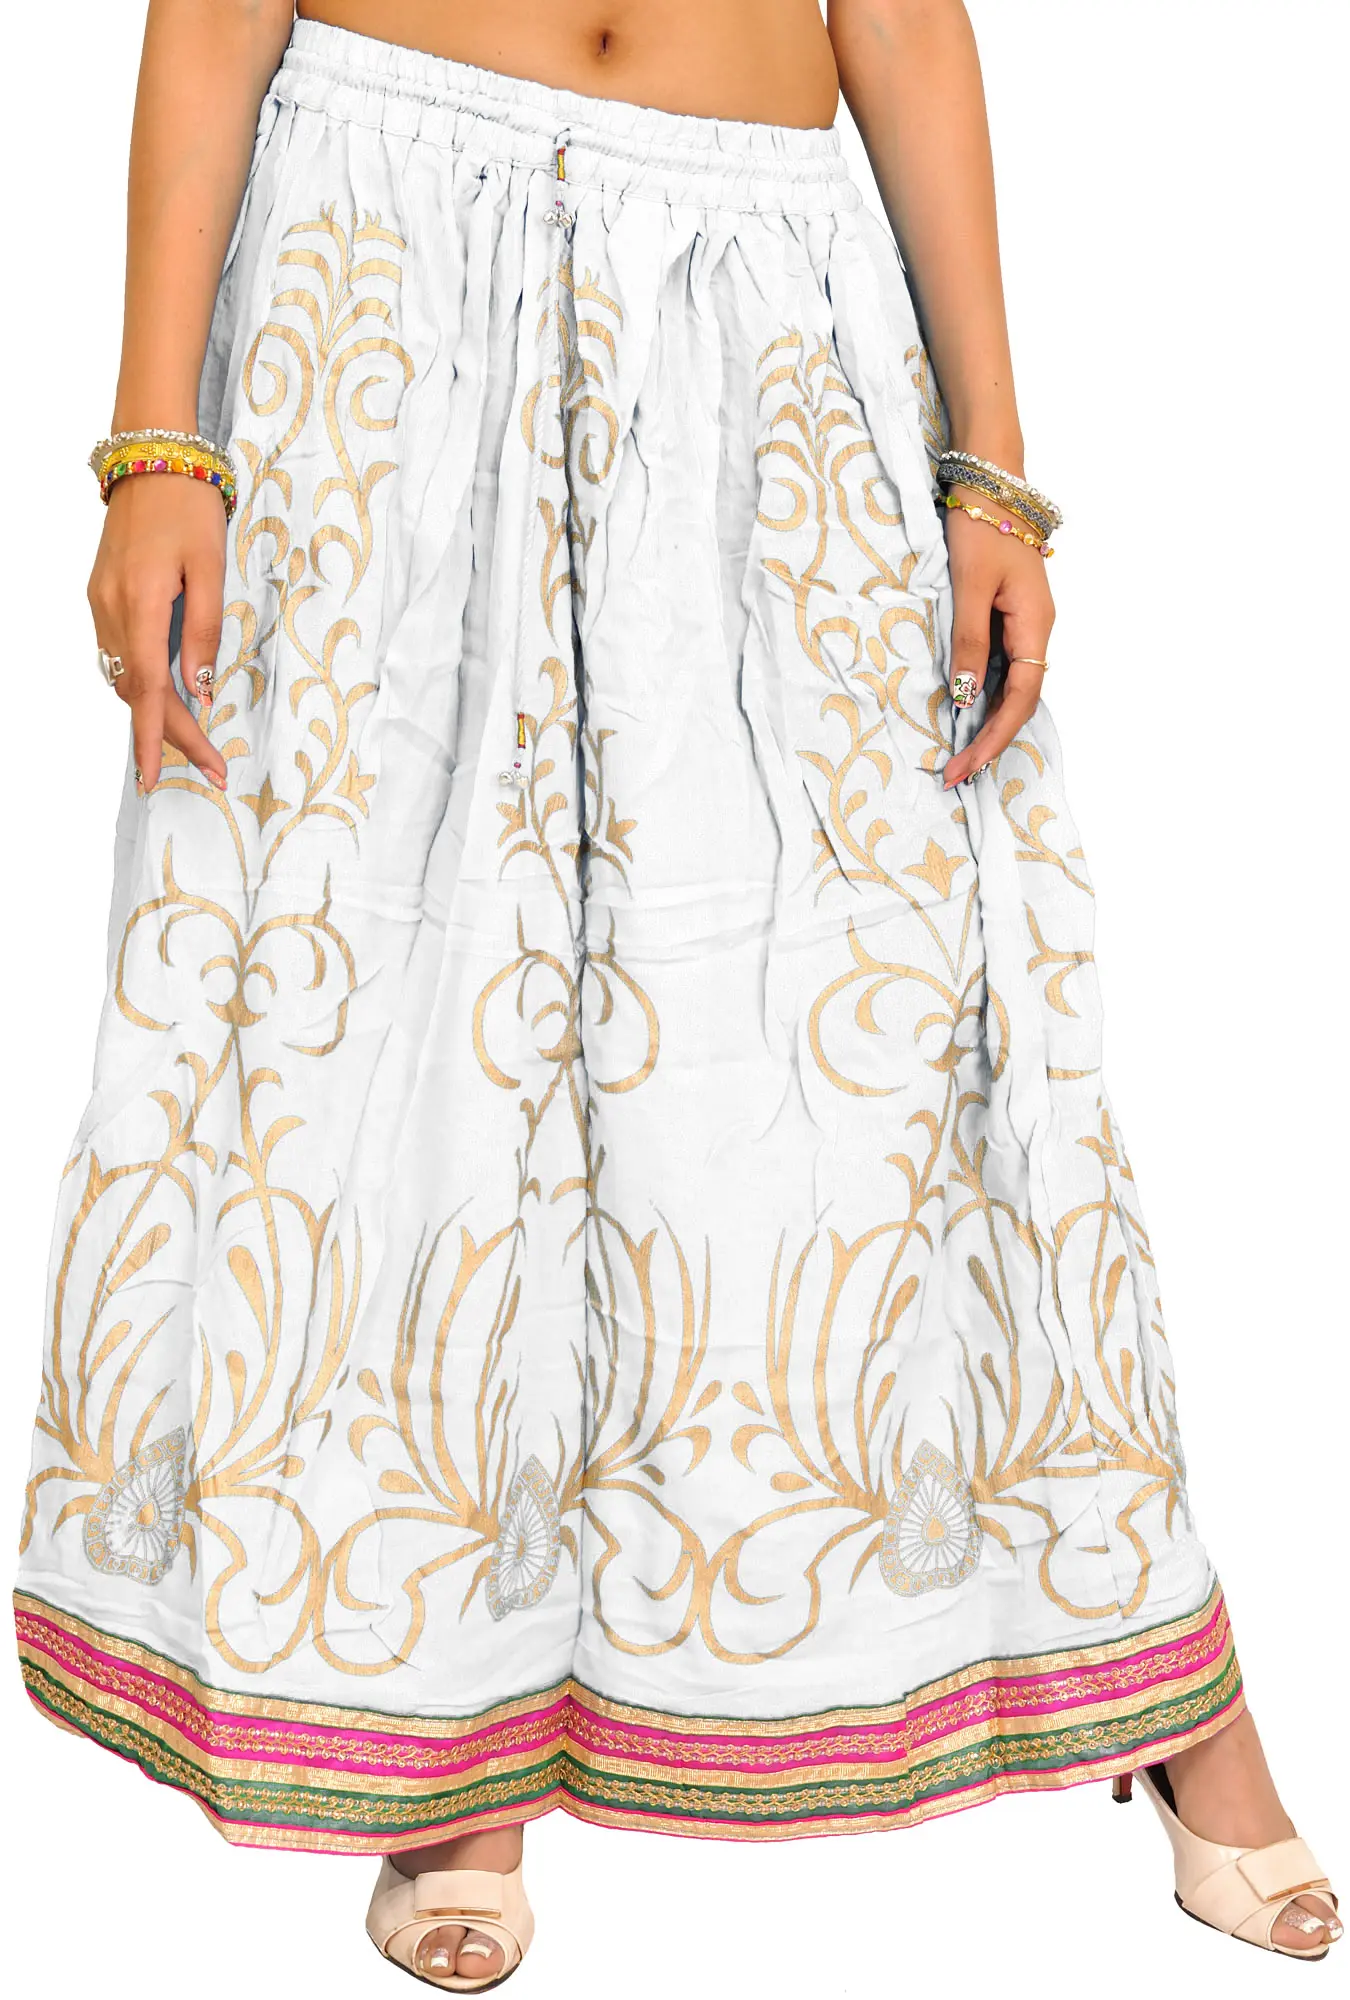 Exotic India Plain Long Skirt with Embellished Patch Border